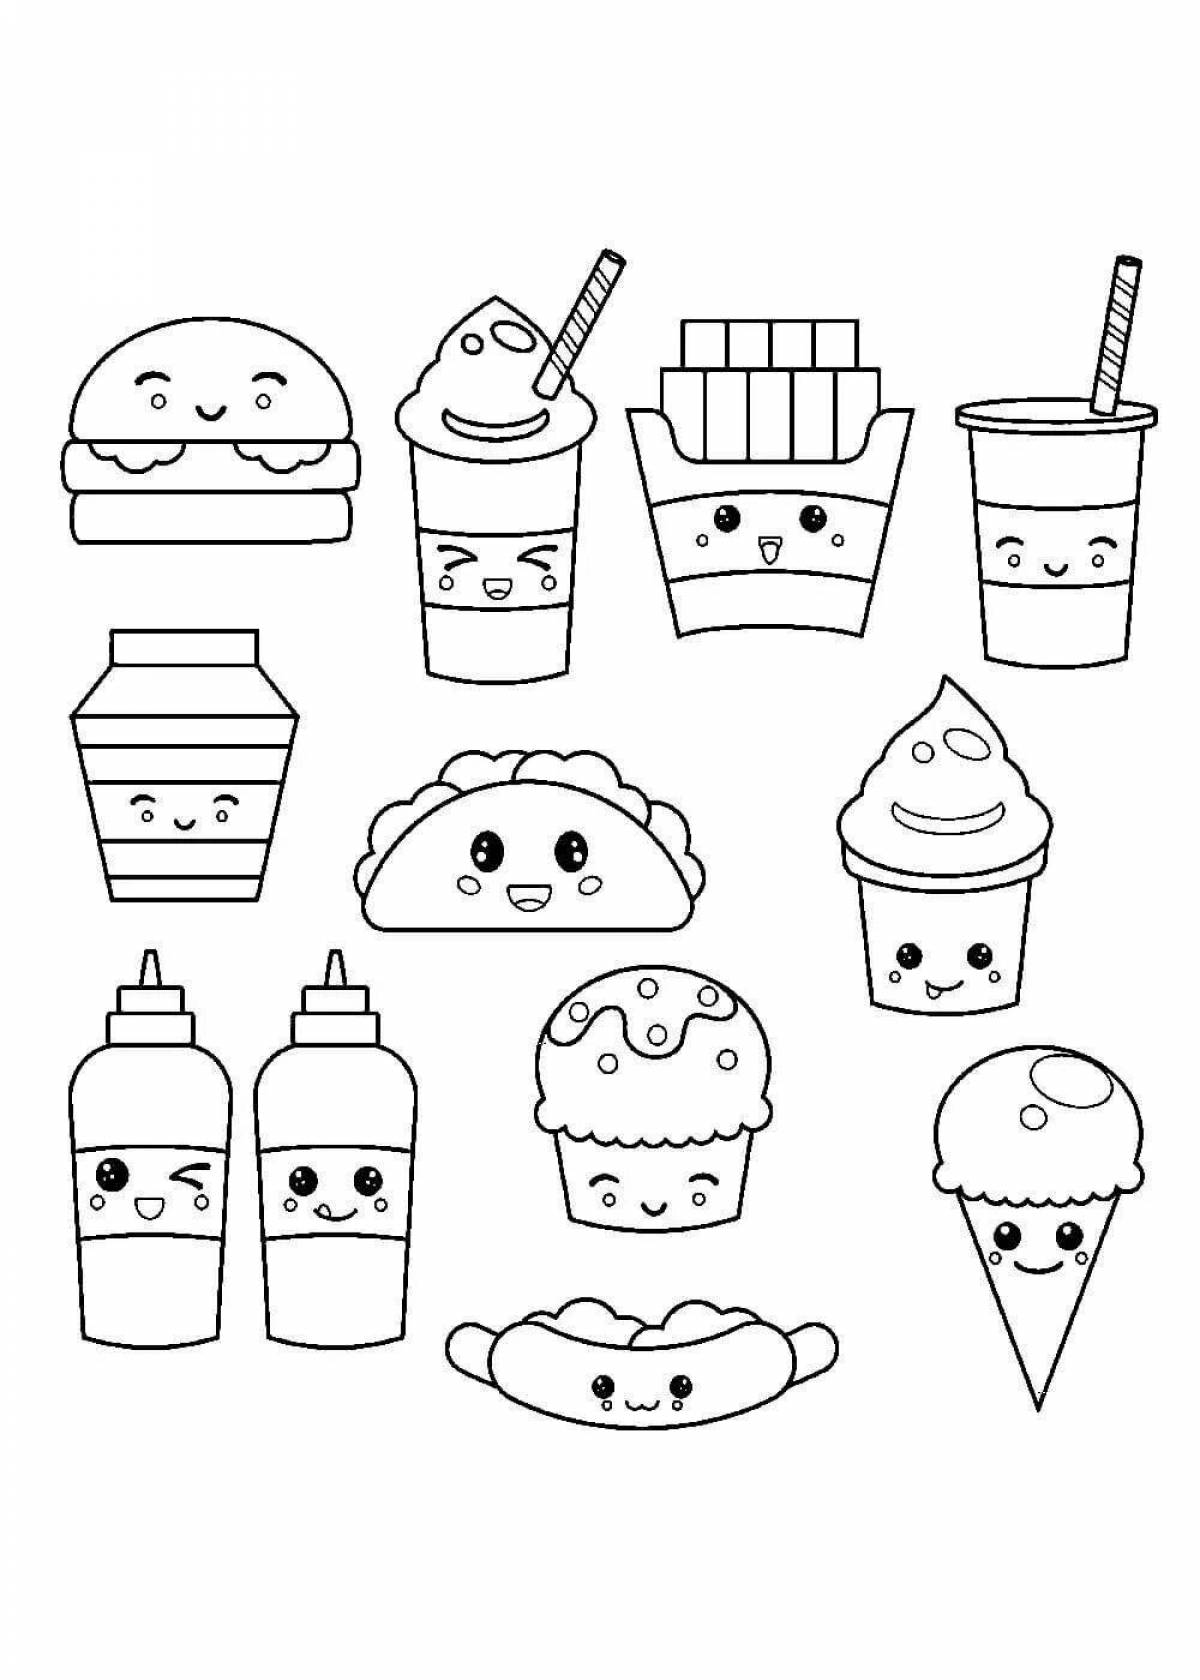 Joyful coloring pages with stickers